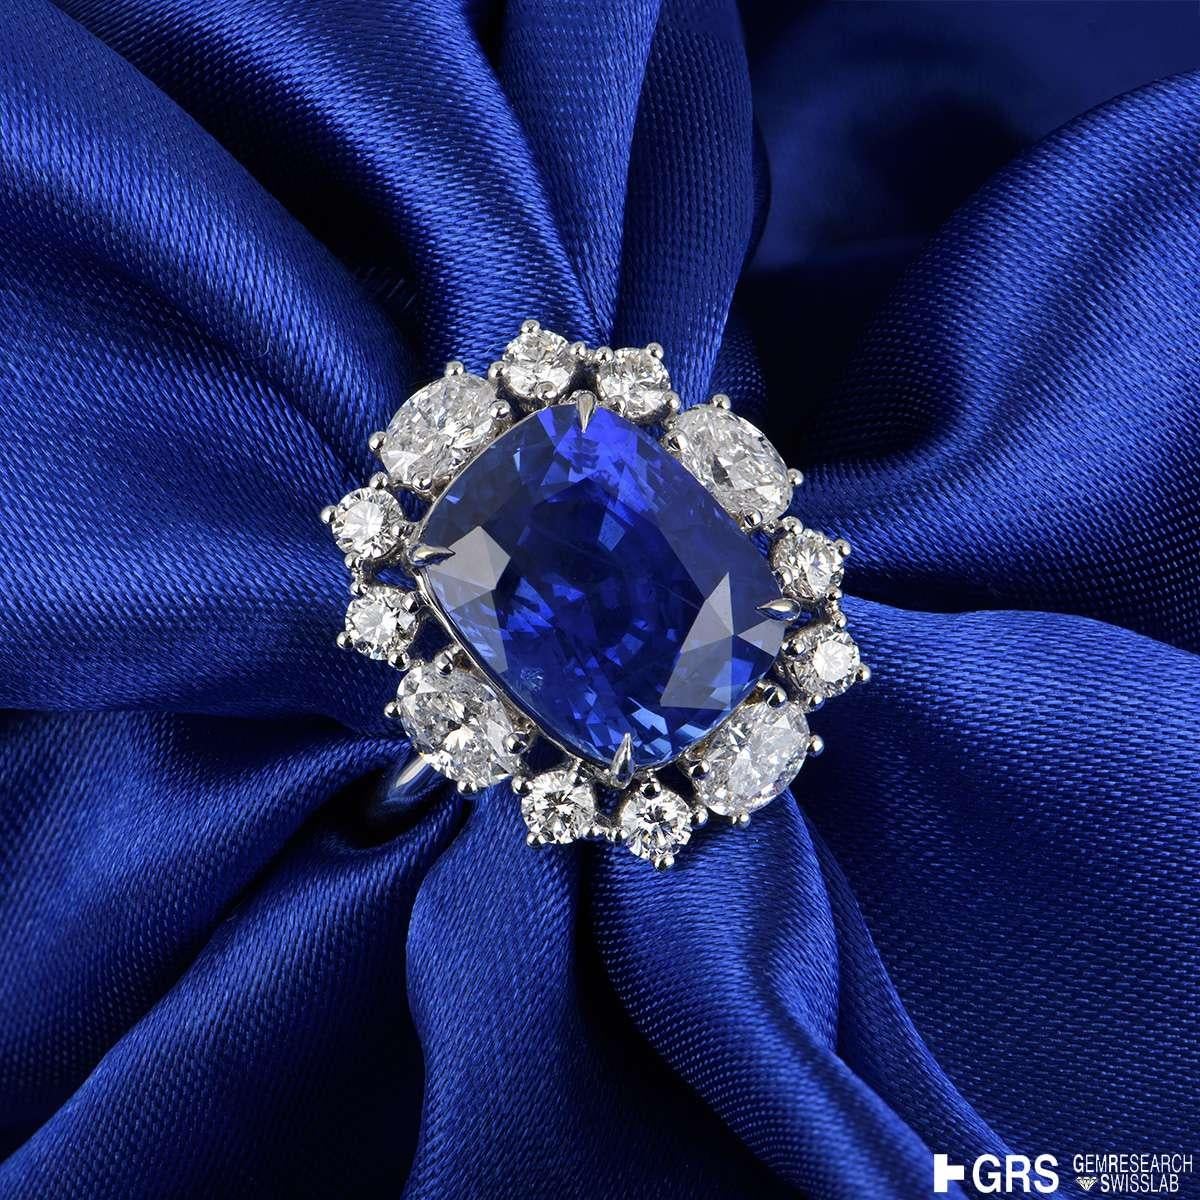 An extraordinary 18k white gold sapphire and diamond ring. The ring is set to the centre with an exceptional Sri Lankan cushion cut natural sapphire weighing 9.08ct, displaying a Cornflower blue hue, with no indications of heat treatment. The